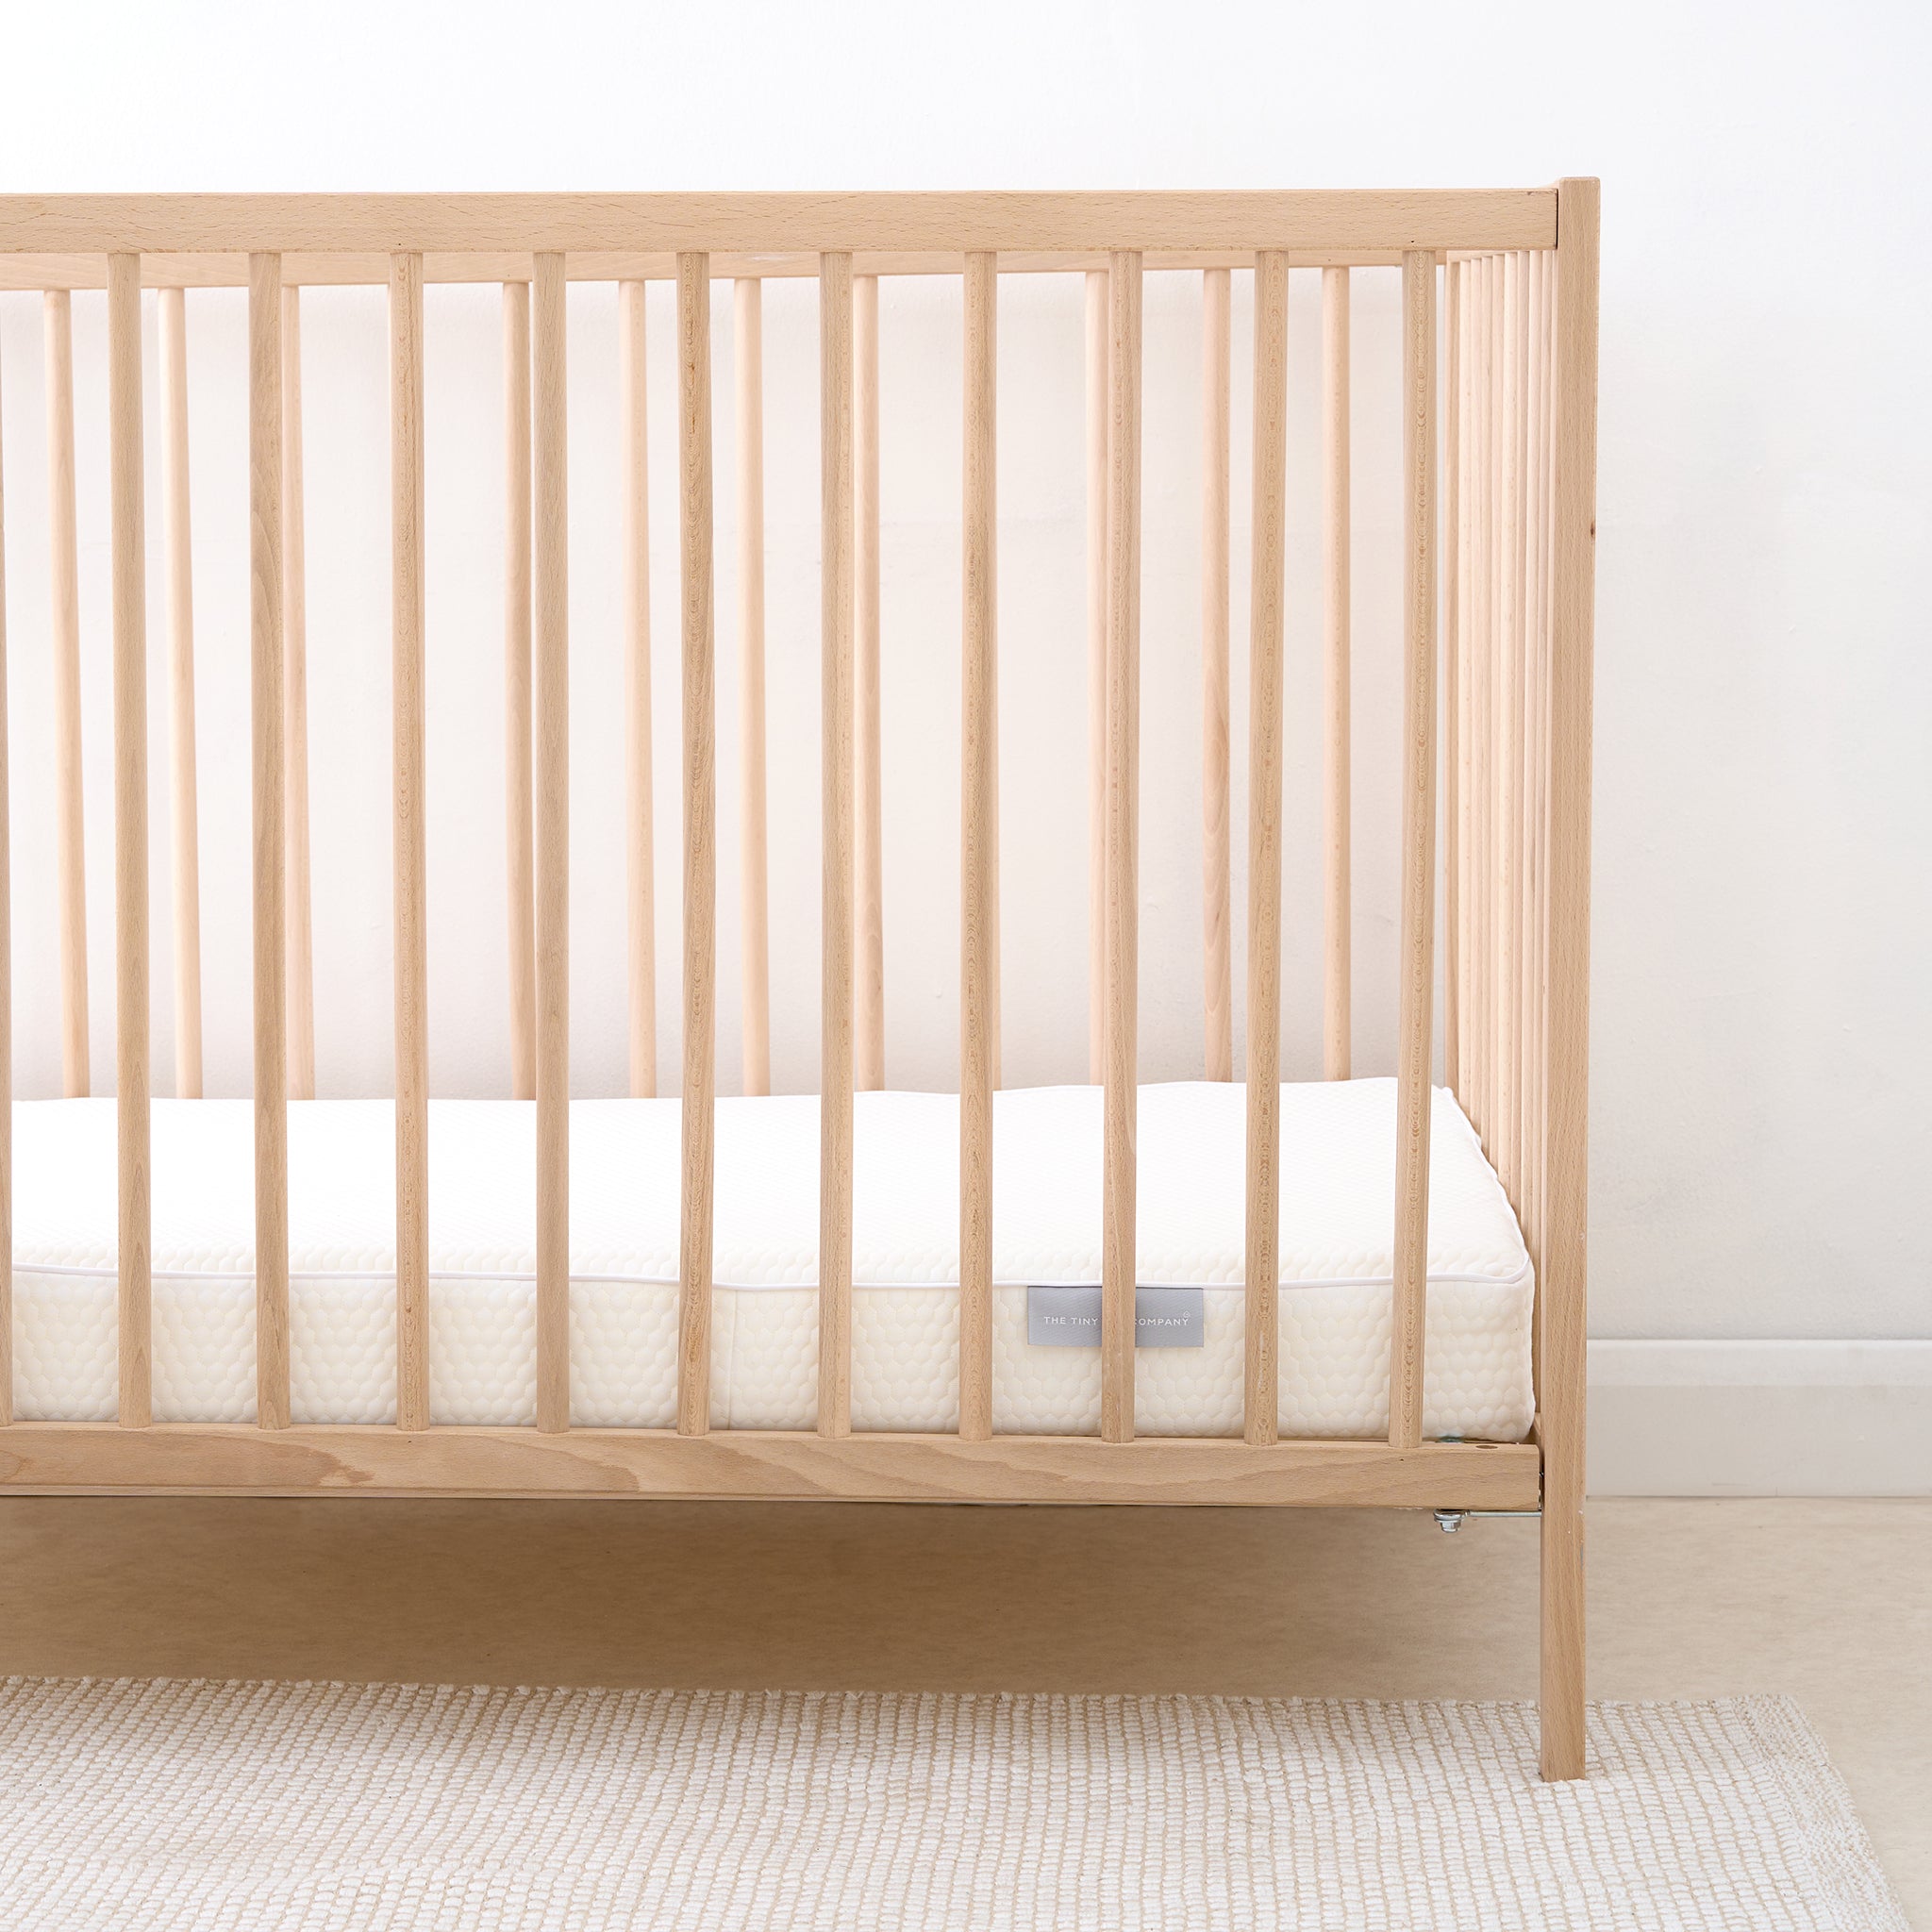 Tiny Dreamer Natural™ - Organic Coconut & 100% Wool Core Cot Mattress To Fit IKEA (160 x 70cm) - The Tiny Bed Company™